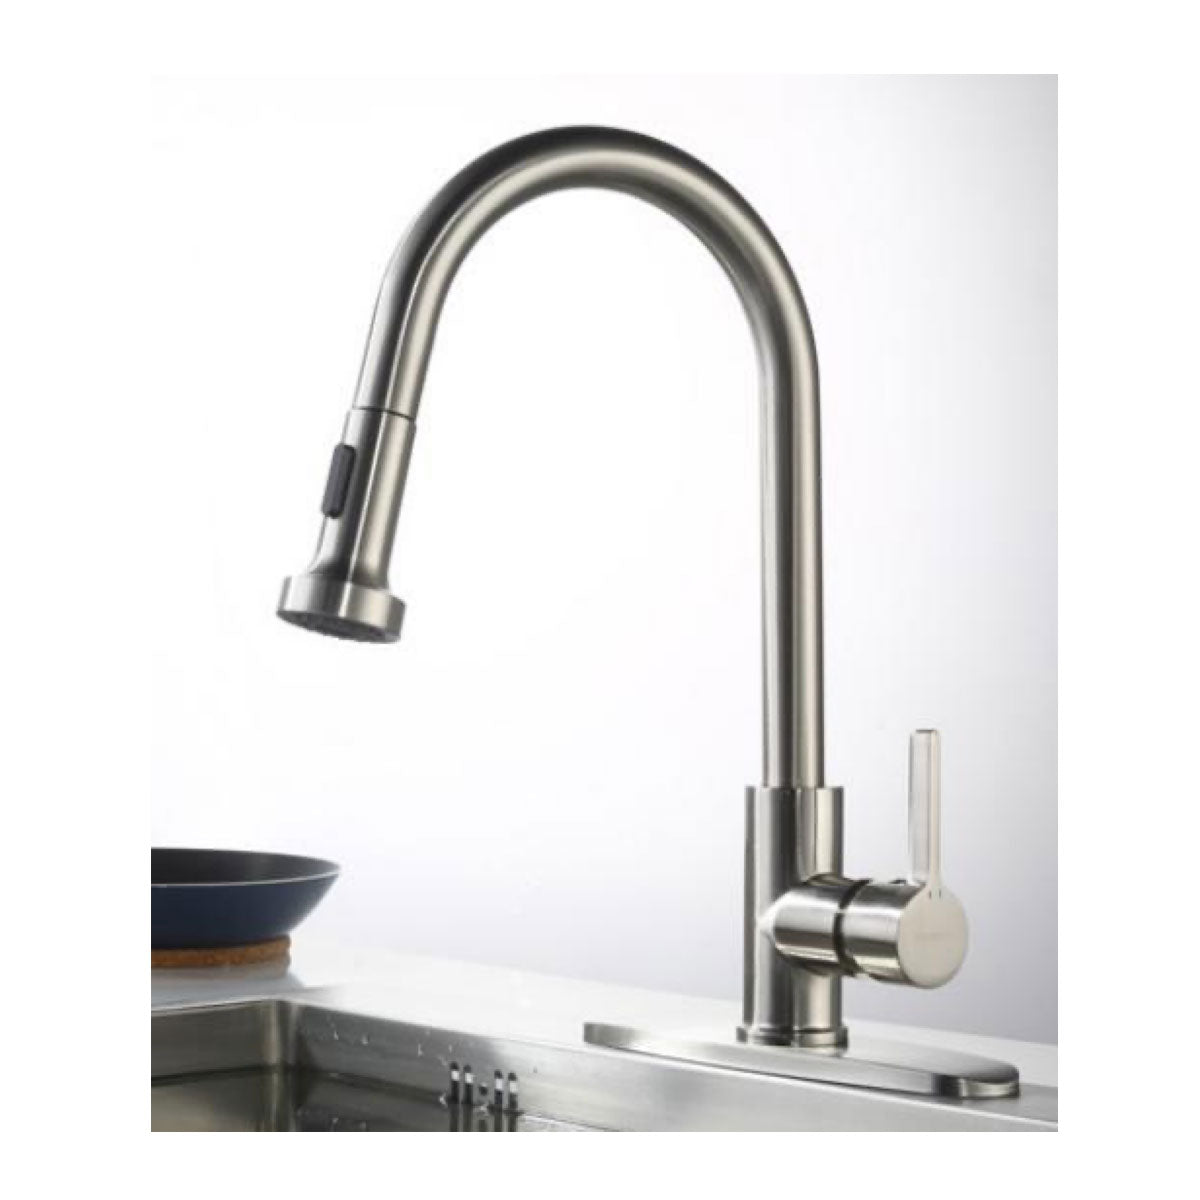 Duko FC422002-SS Stainless Steel Kitchen Single Handle Faucet With Stainless Steel Valve